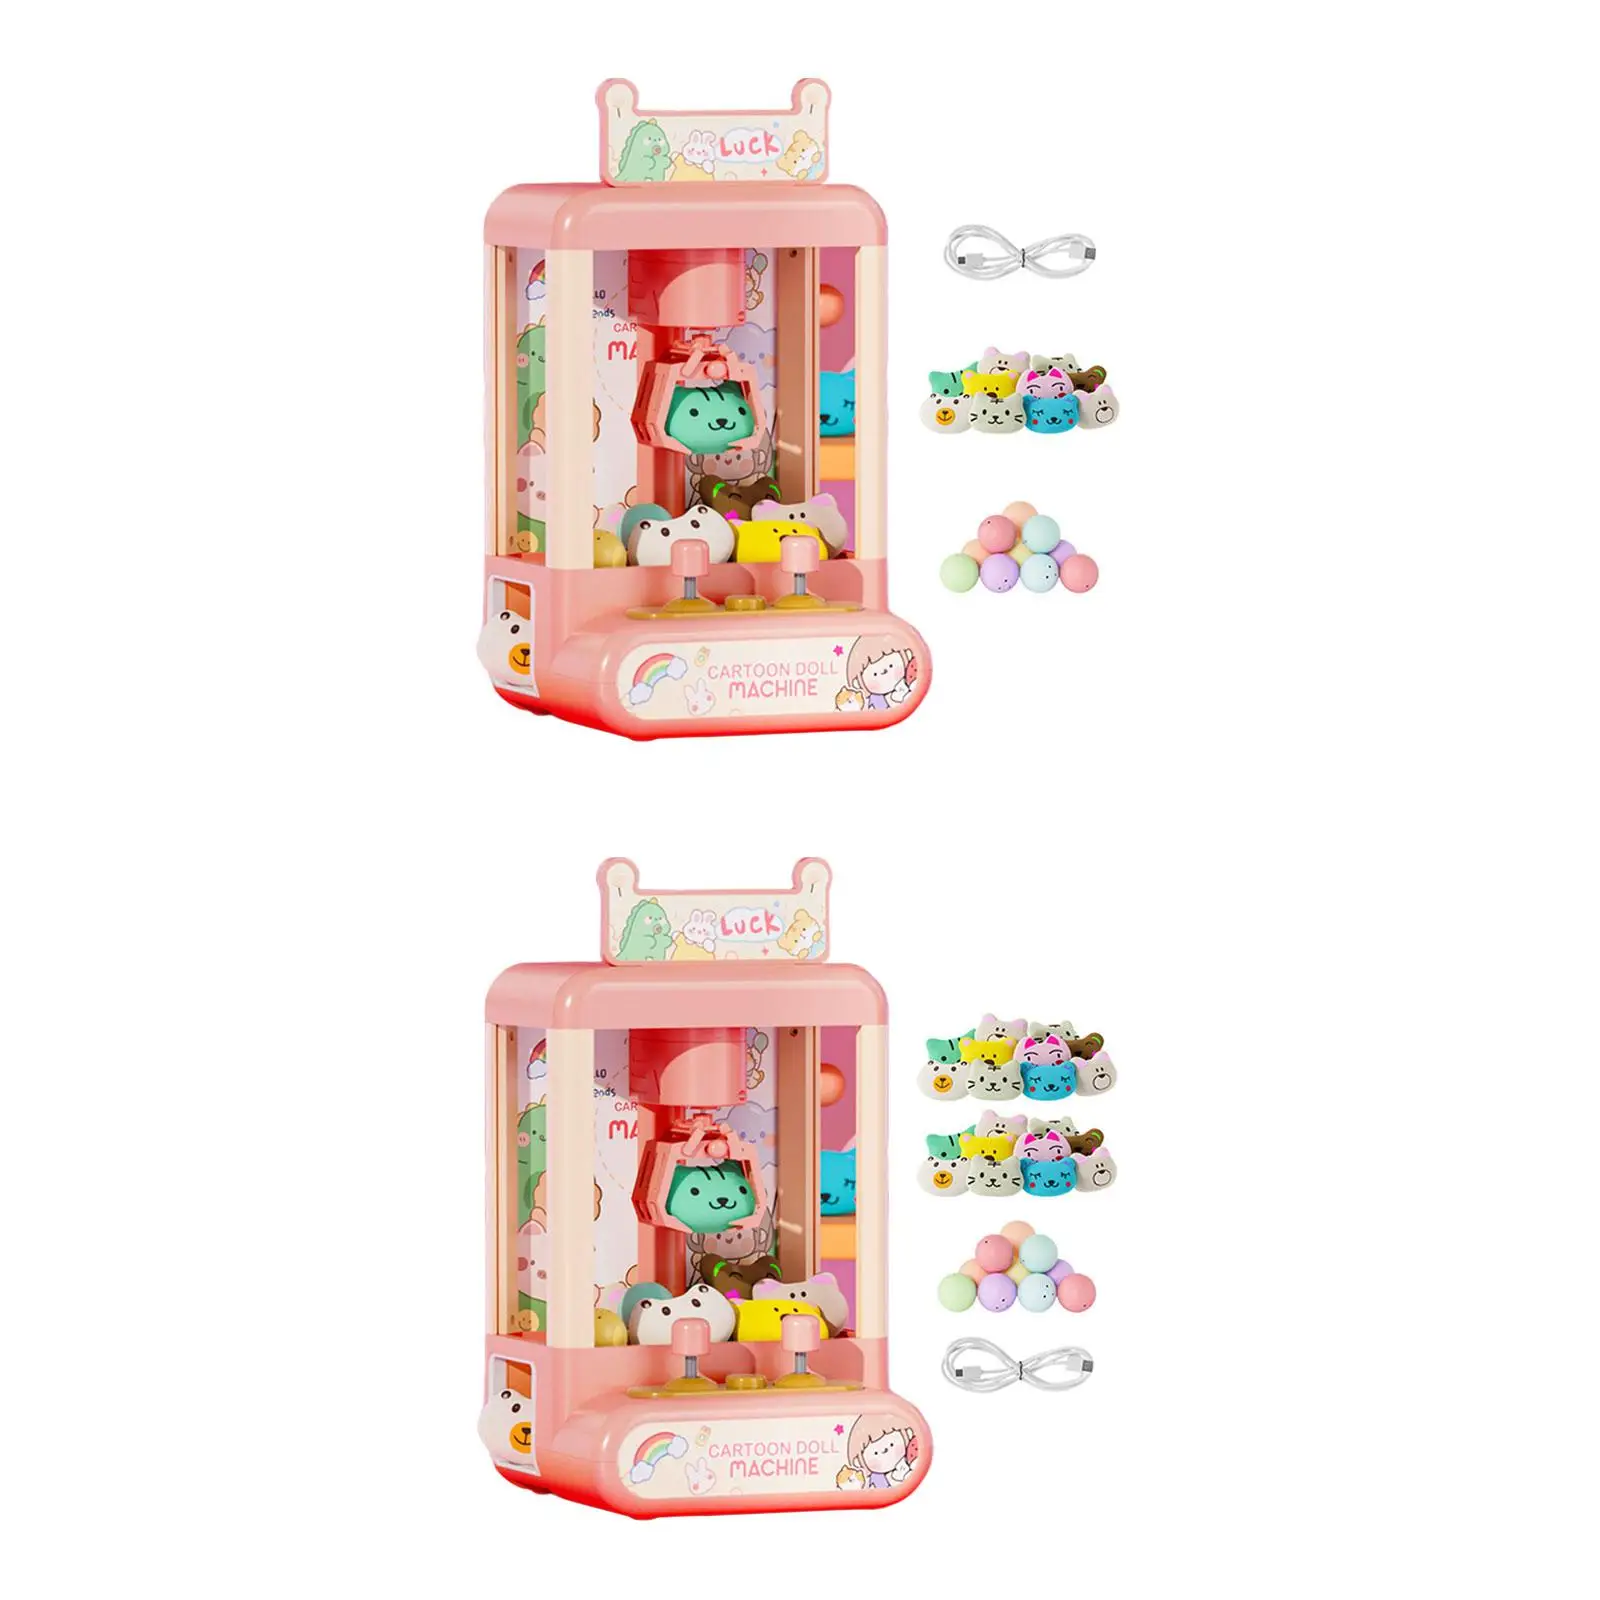 Kids Small Claw Machine Electronic Arcade Game Grabbing Machine with Music and Lights for Kids Girls Boys Children Holiday Gifts